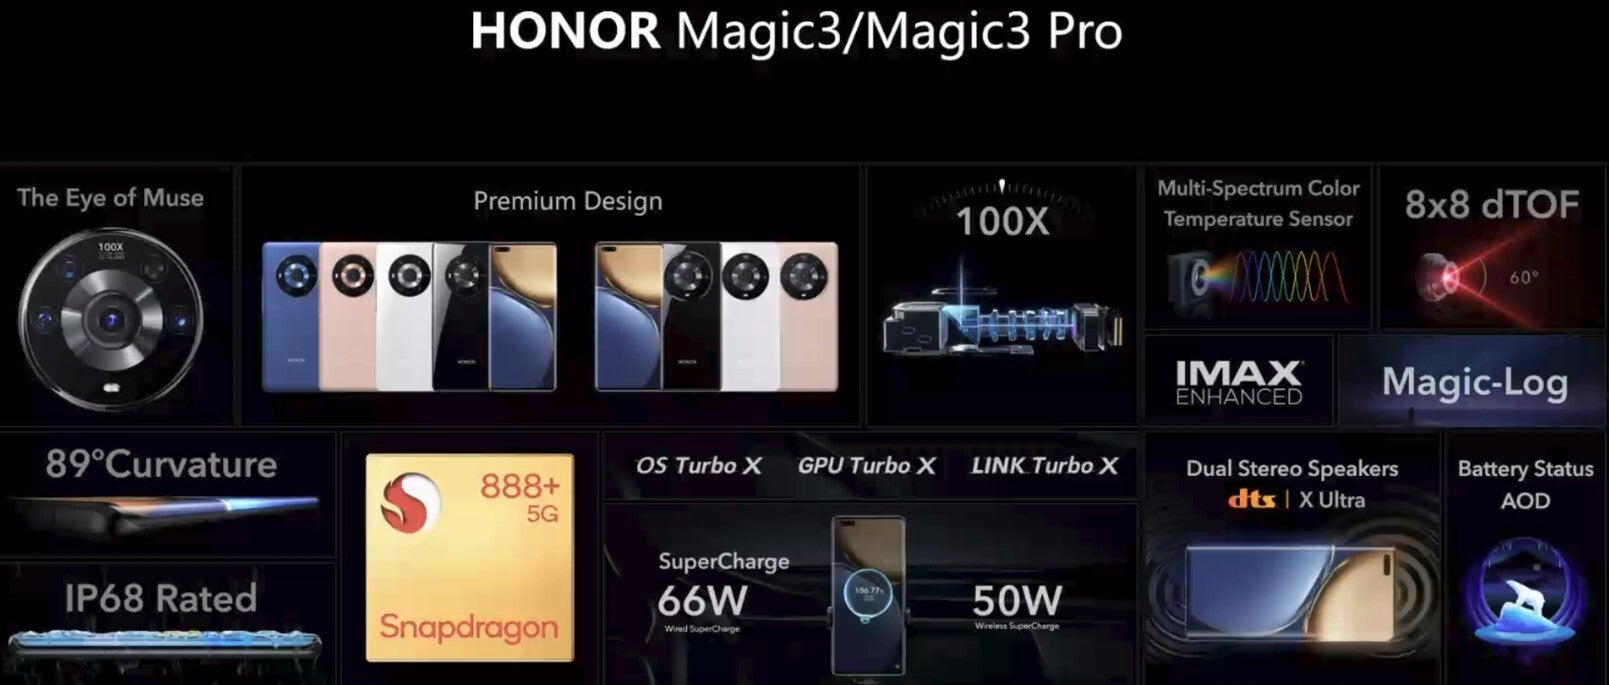 Honor Magic 3 and 3 Pro specs and colors - Honor Magic 3 series out to prove camera design symmetry possible